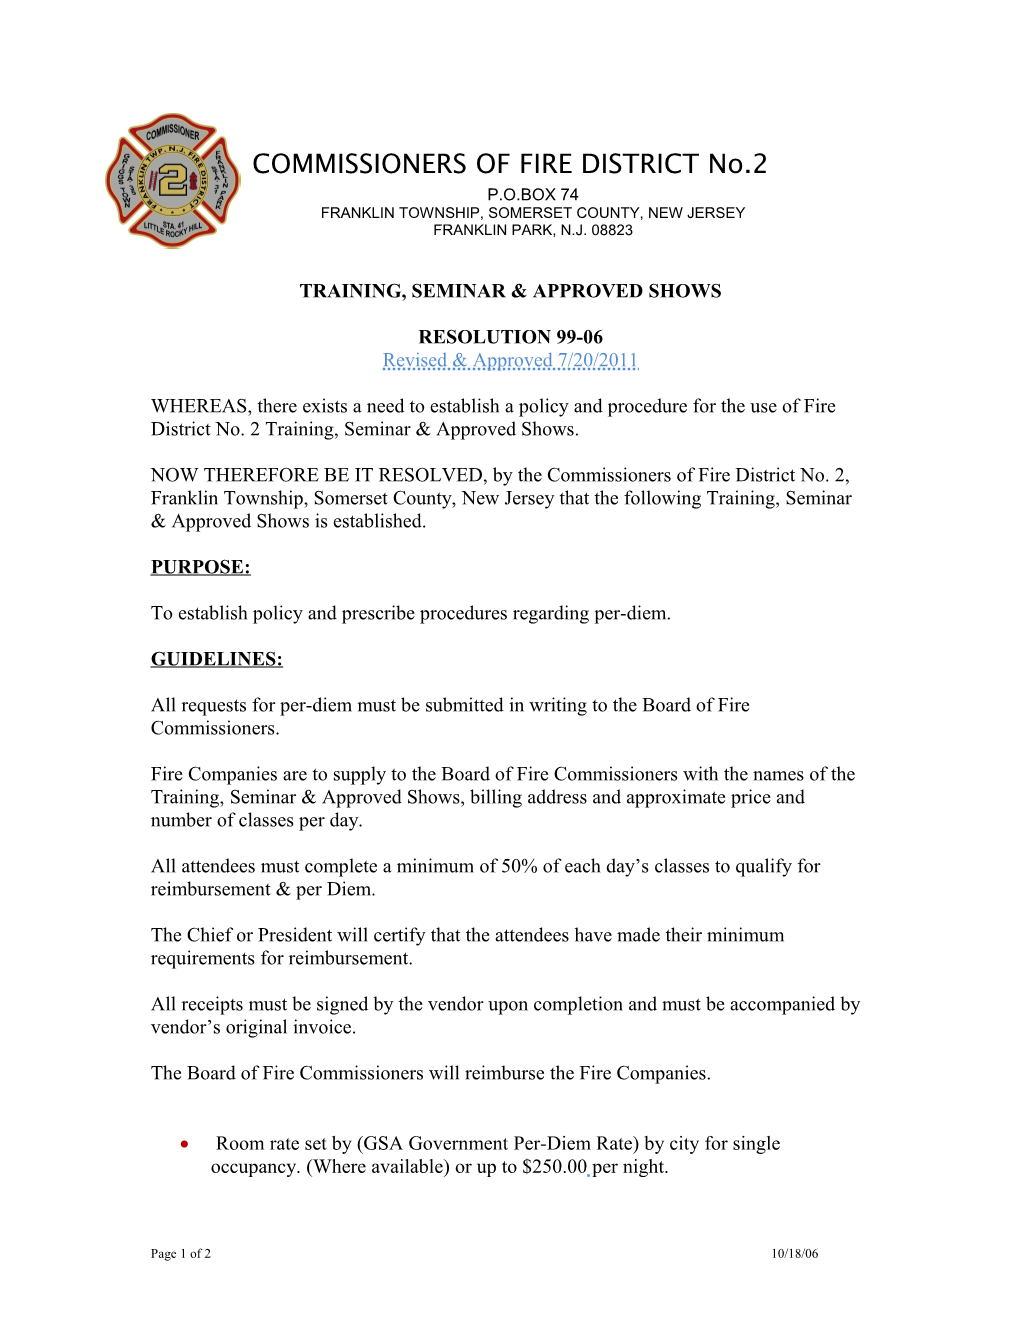 Commissioners of Fire District No